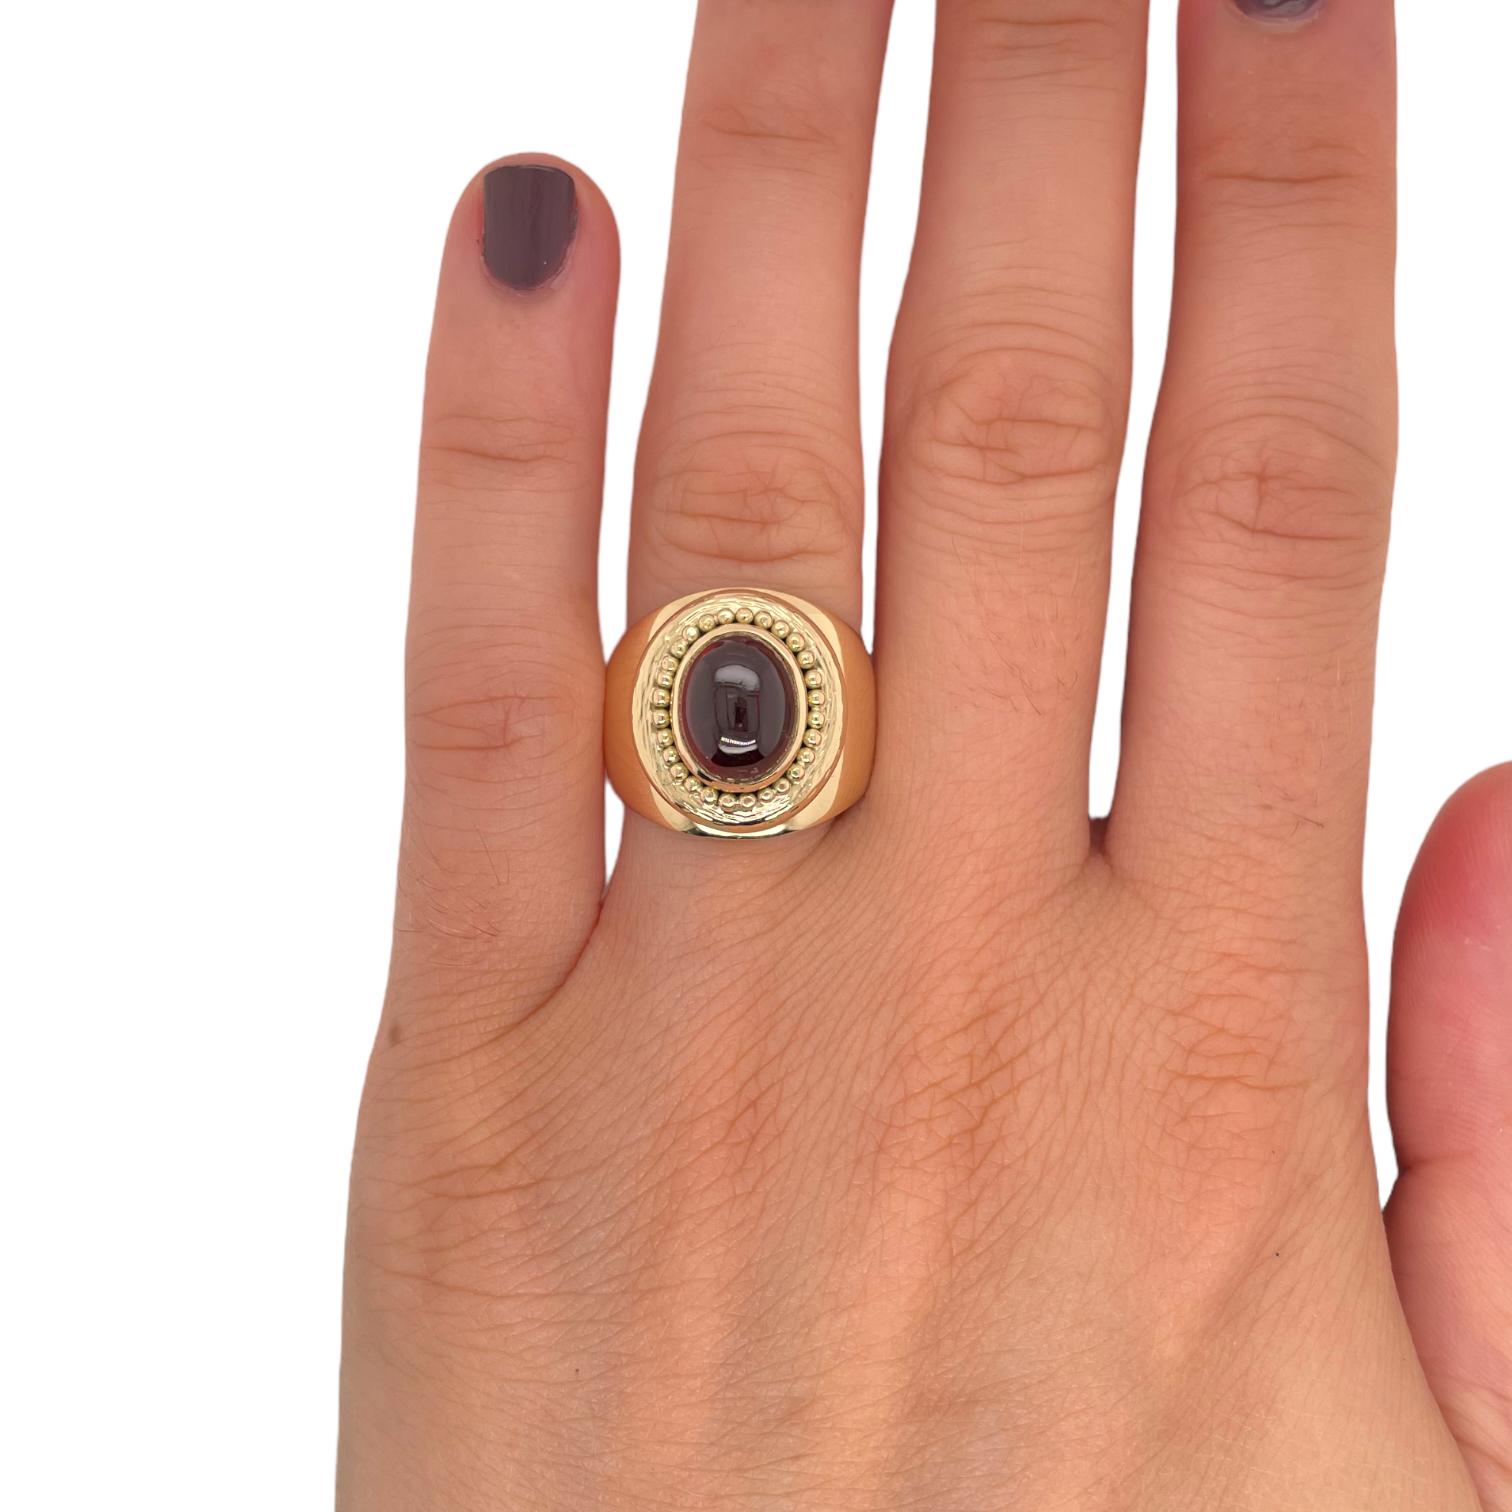 Ring contains one center 9.7x7.7mm oval cabochon garnet, approximately 2.50cts. Surrounding oval garnet are 18K yellow gold bead accents. Widest part of ring measures 17.5mm. Ring weighs approximately 12.3 grams and is a size 6.75. Please request